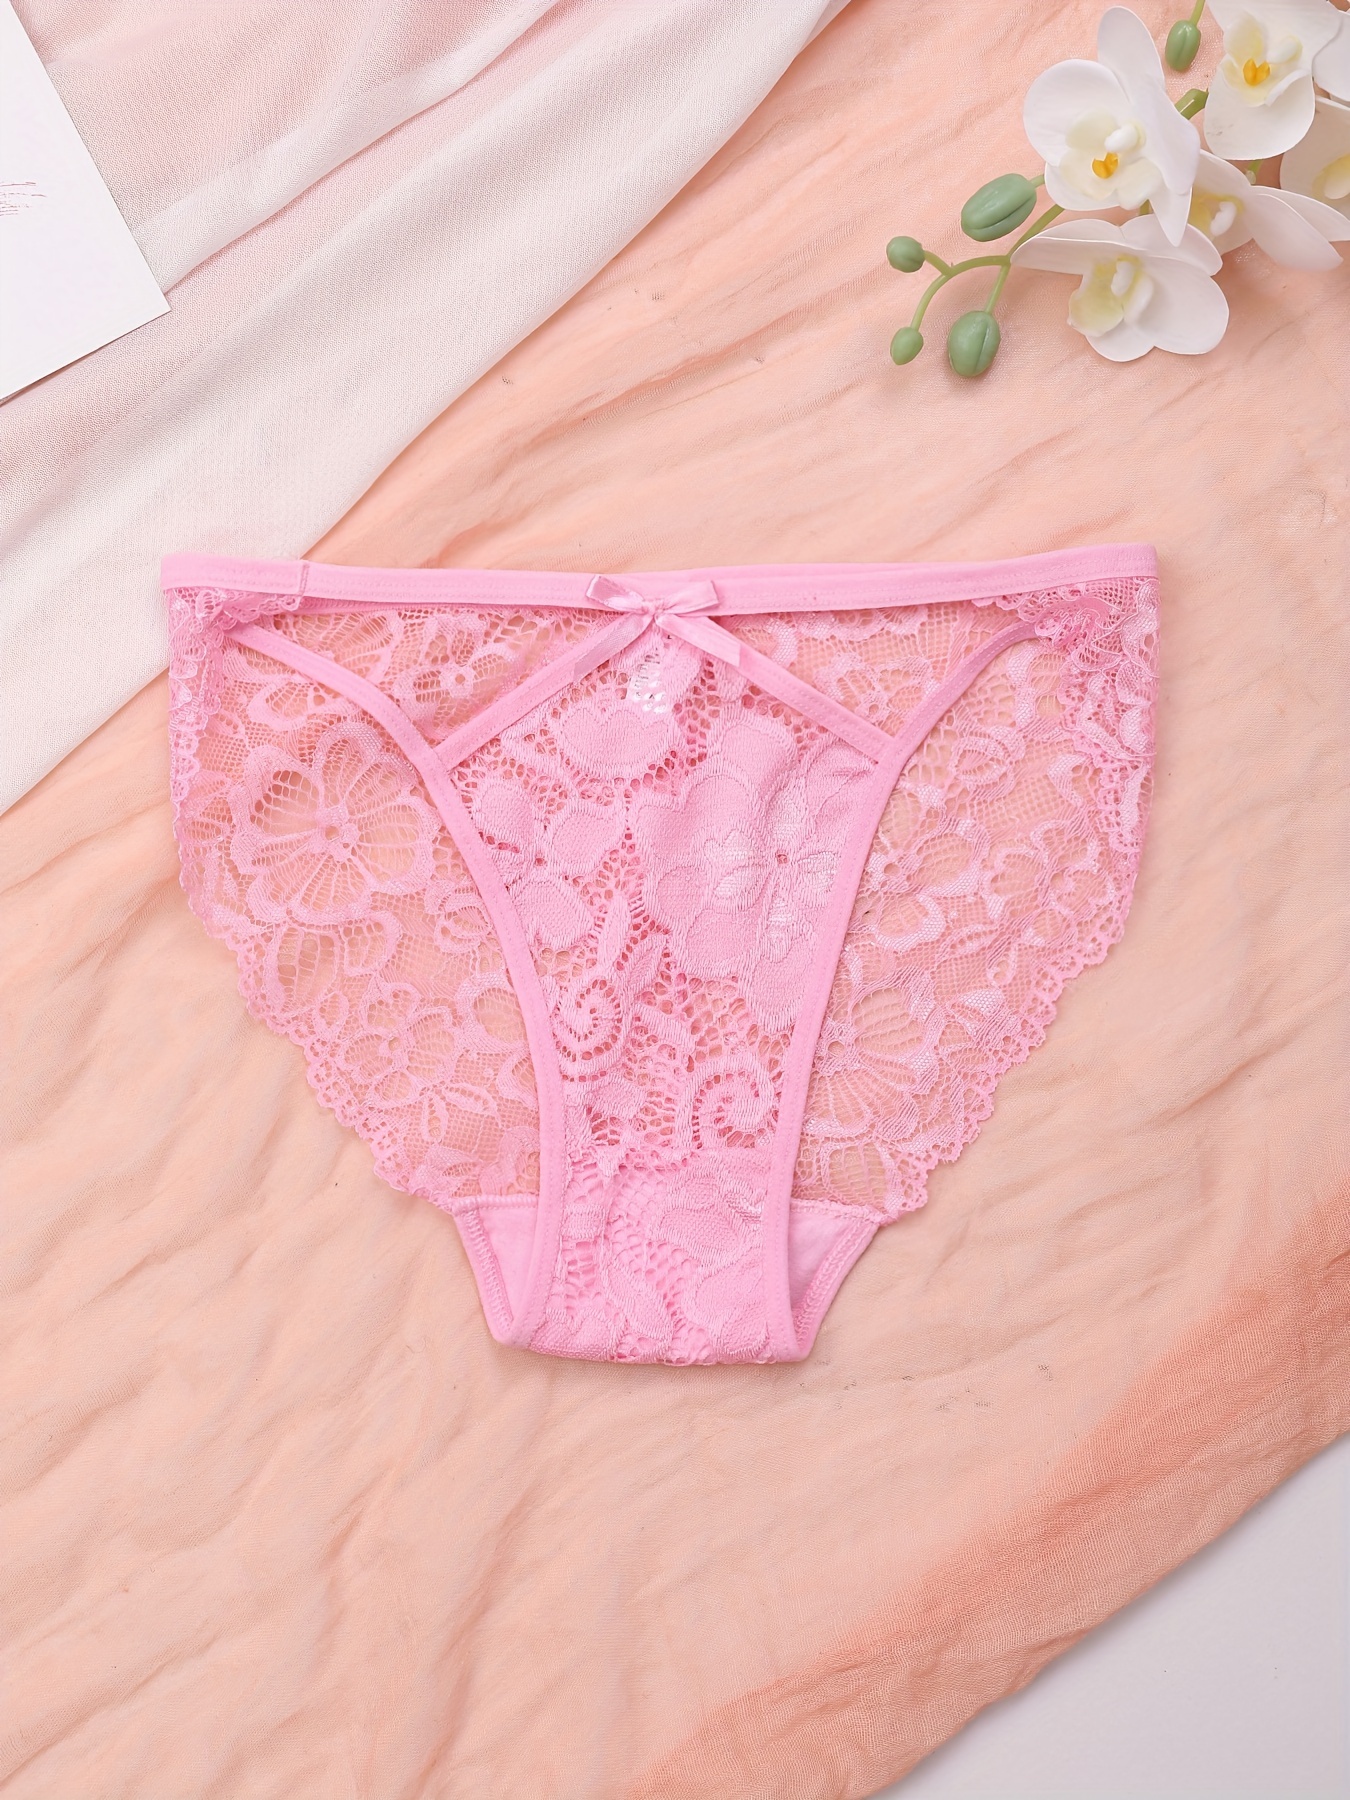 NWT PINK Victoria's Secret extra low-rise hipster panties w/stretch lace sz  S